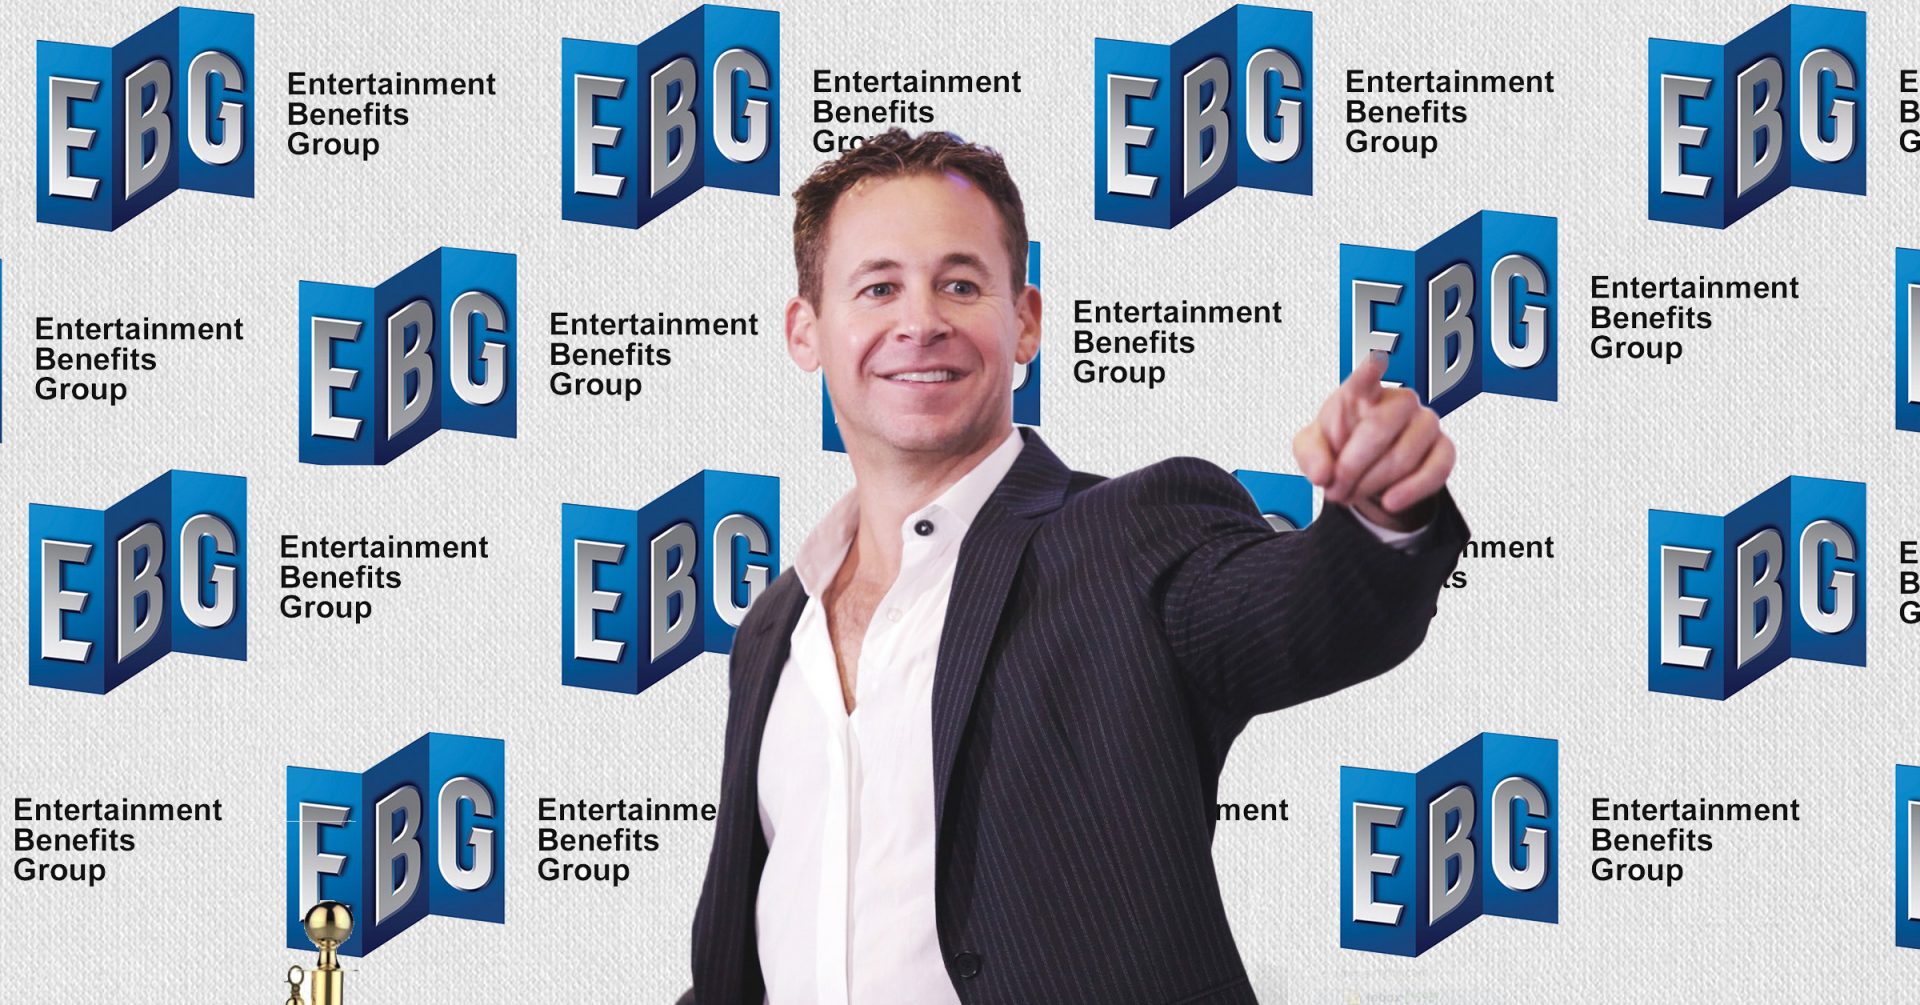 EBG Entertainment Benefits Group Overview